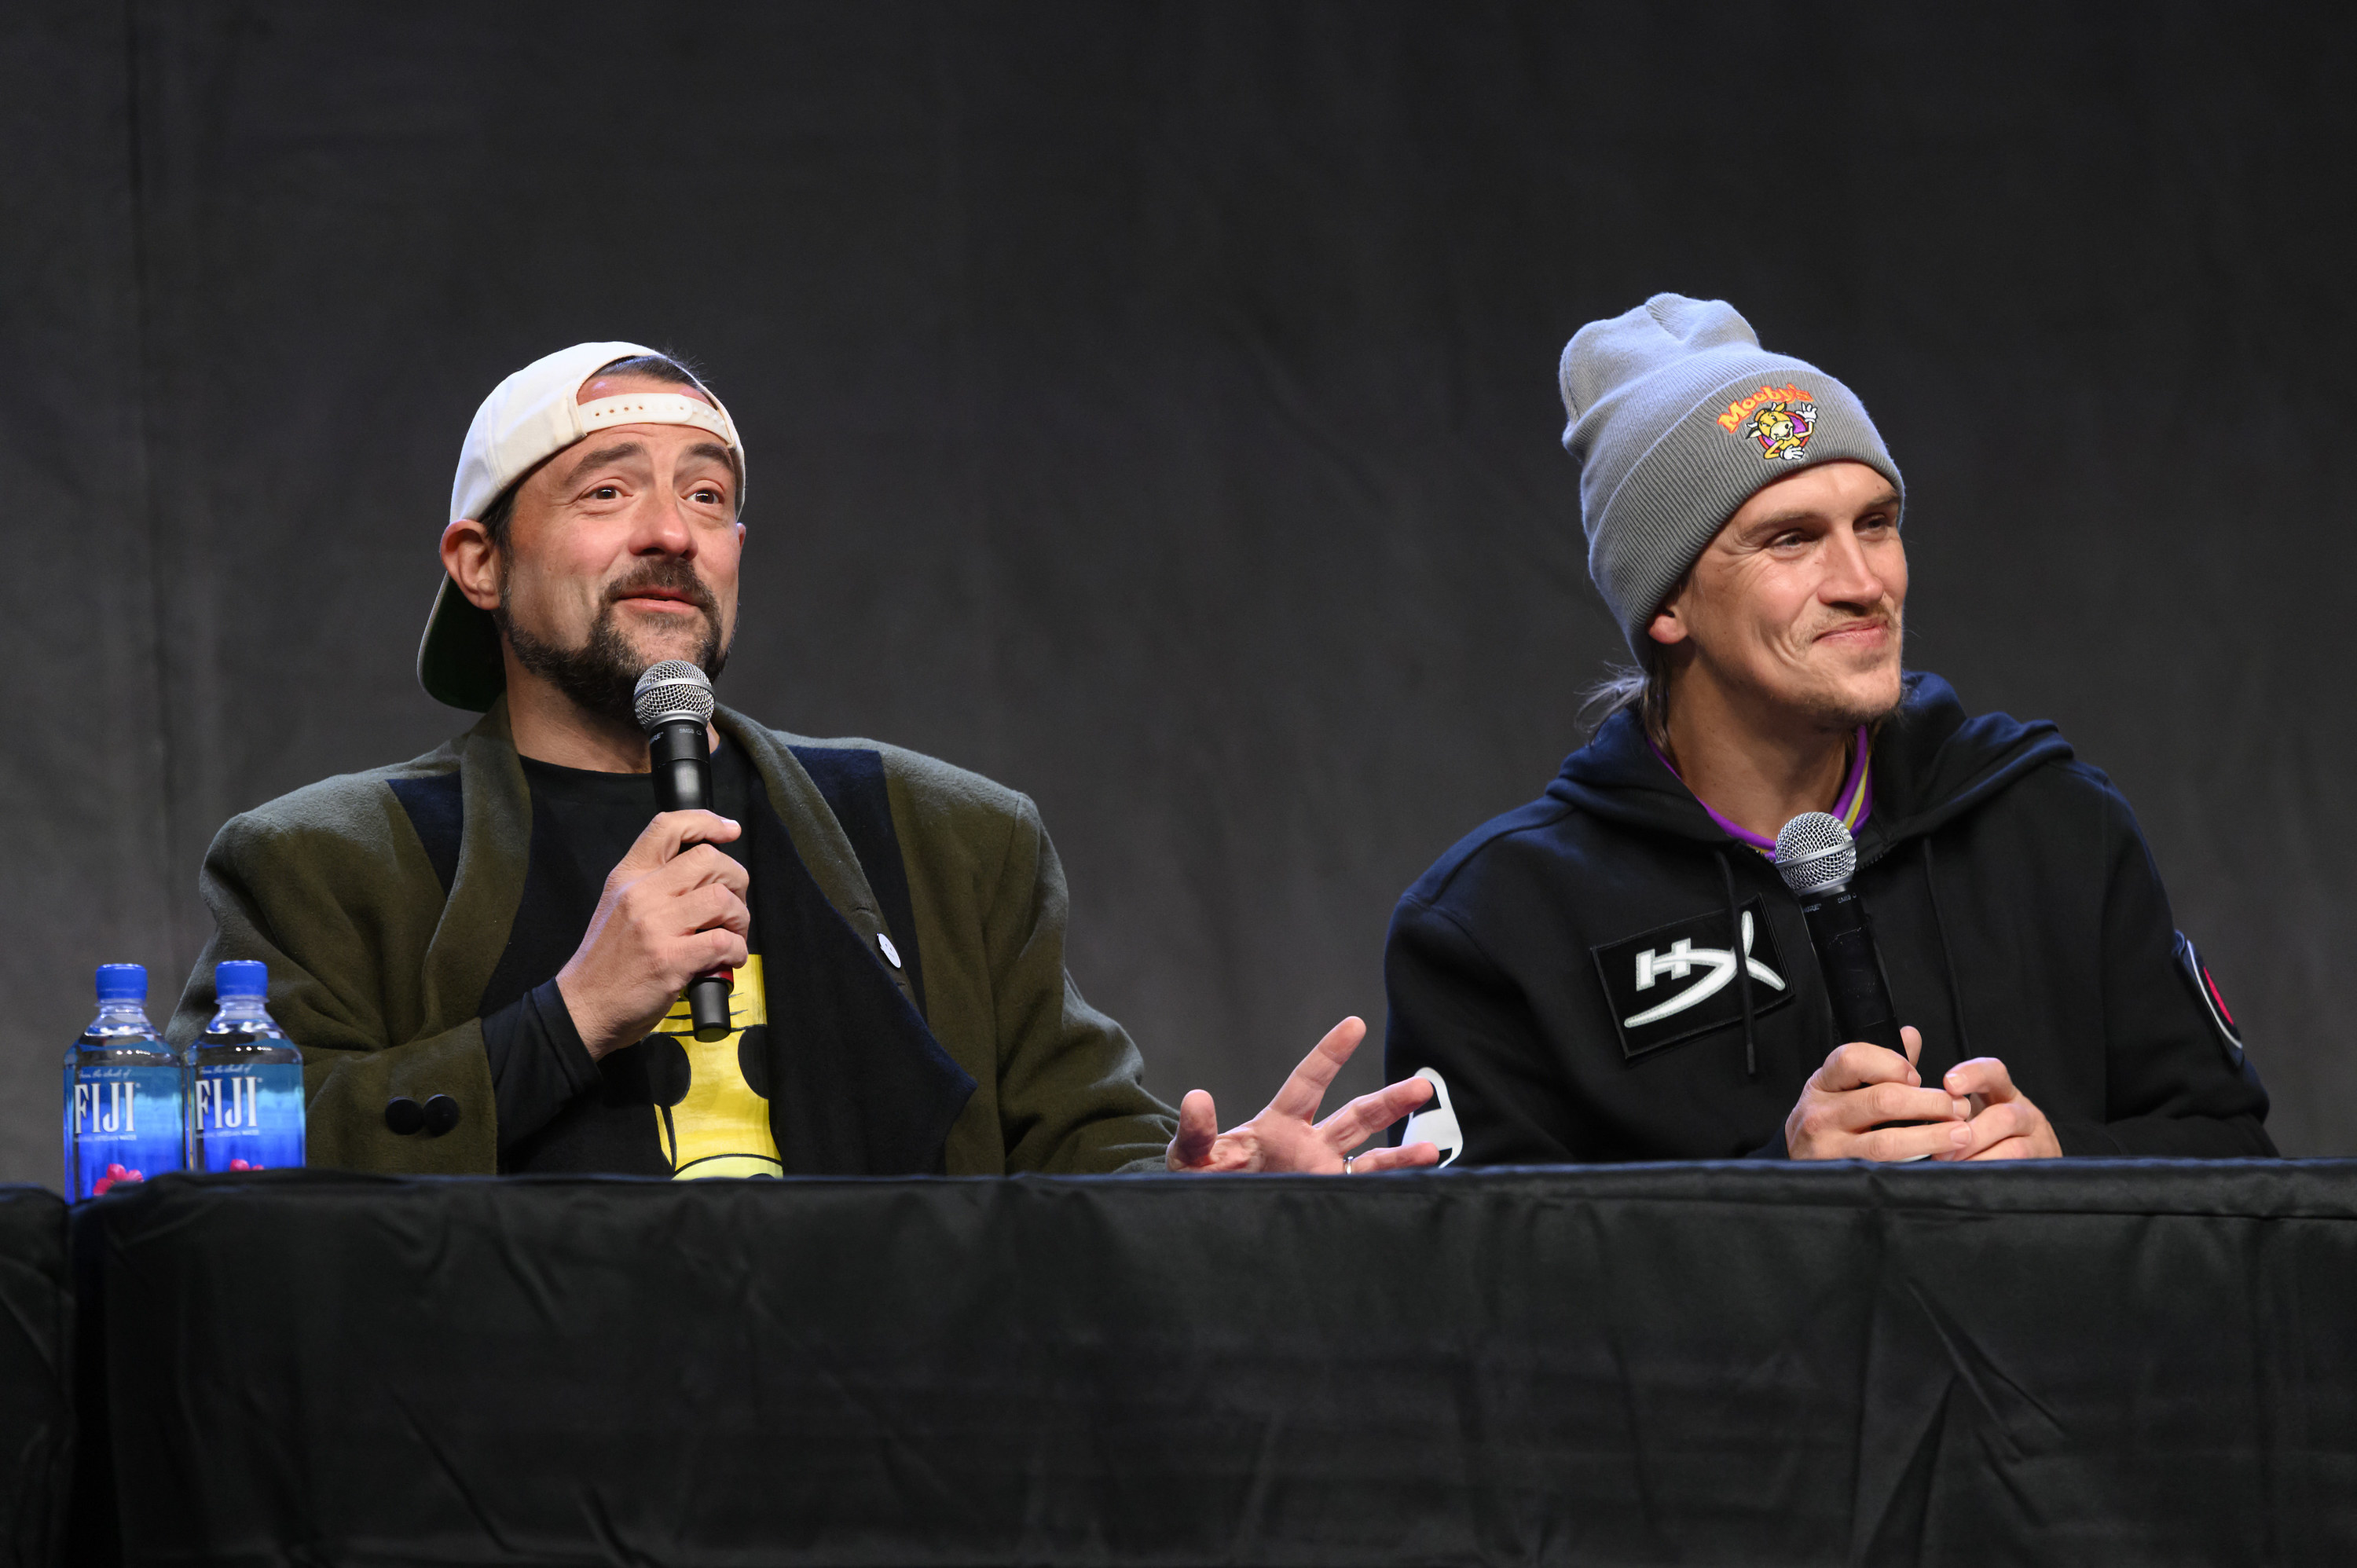 Kevin Smith and Jason Mewes record an episode of the &quot;Jay and Silent Bob Get Old&quot; podcast live